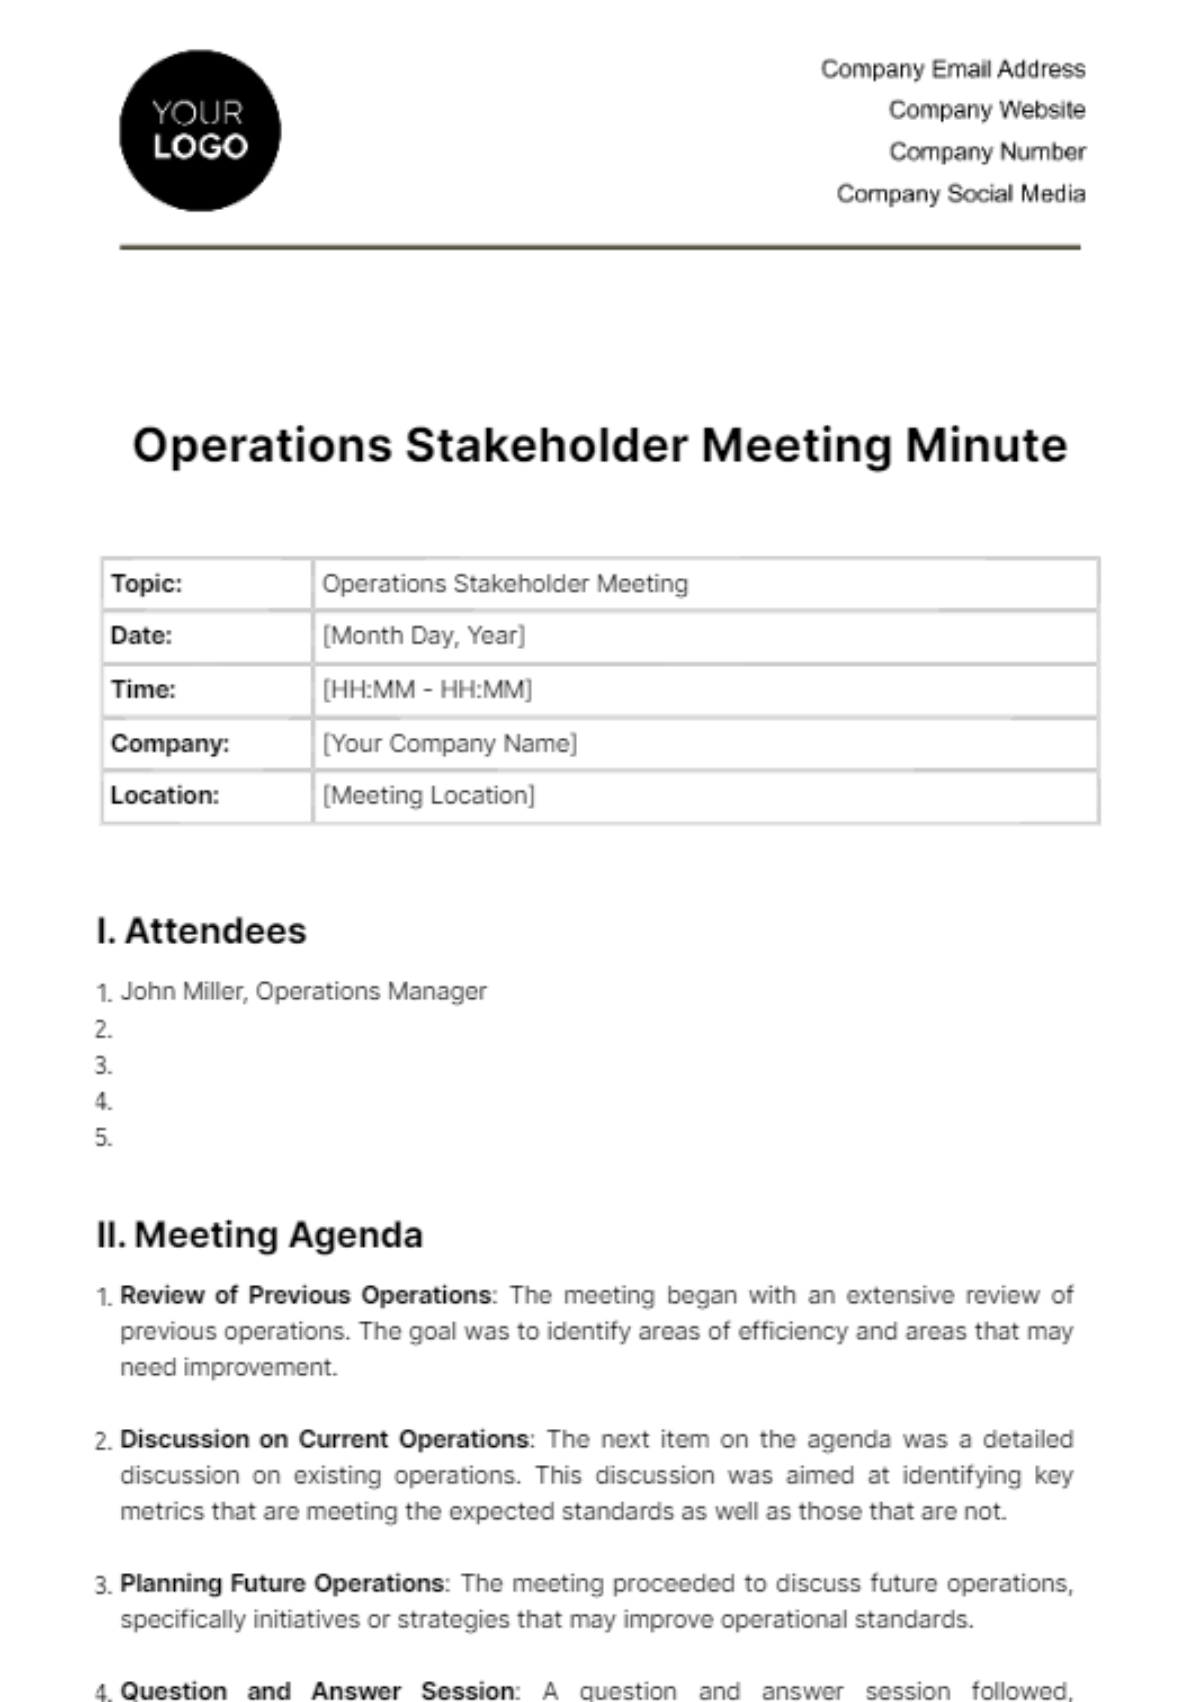 Operations Stakeholder Meeting Minute Template